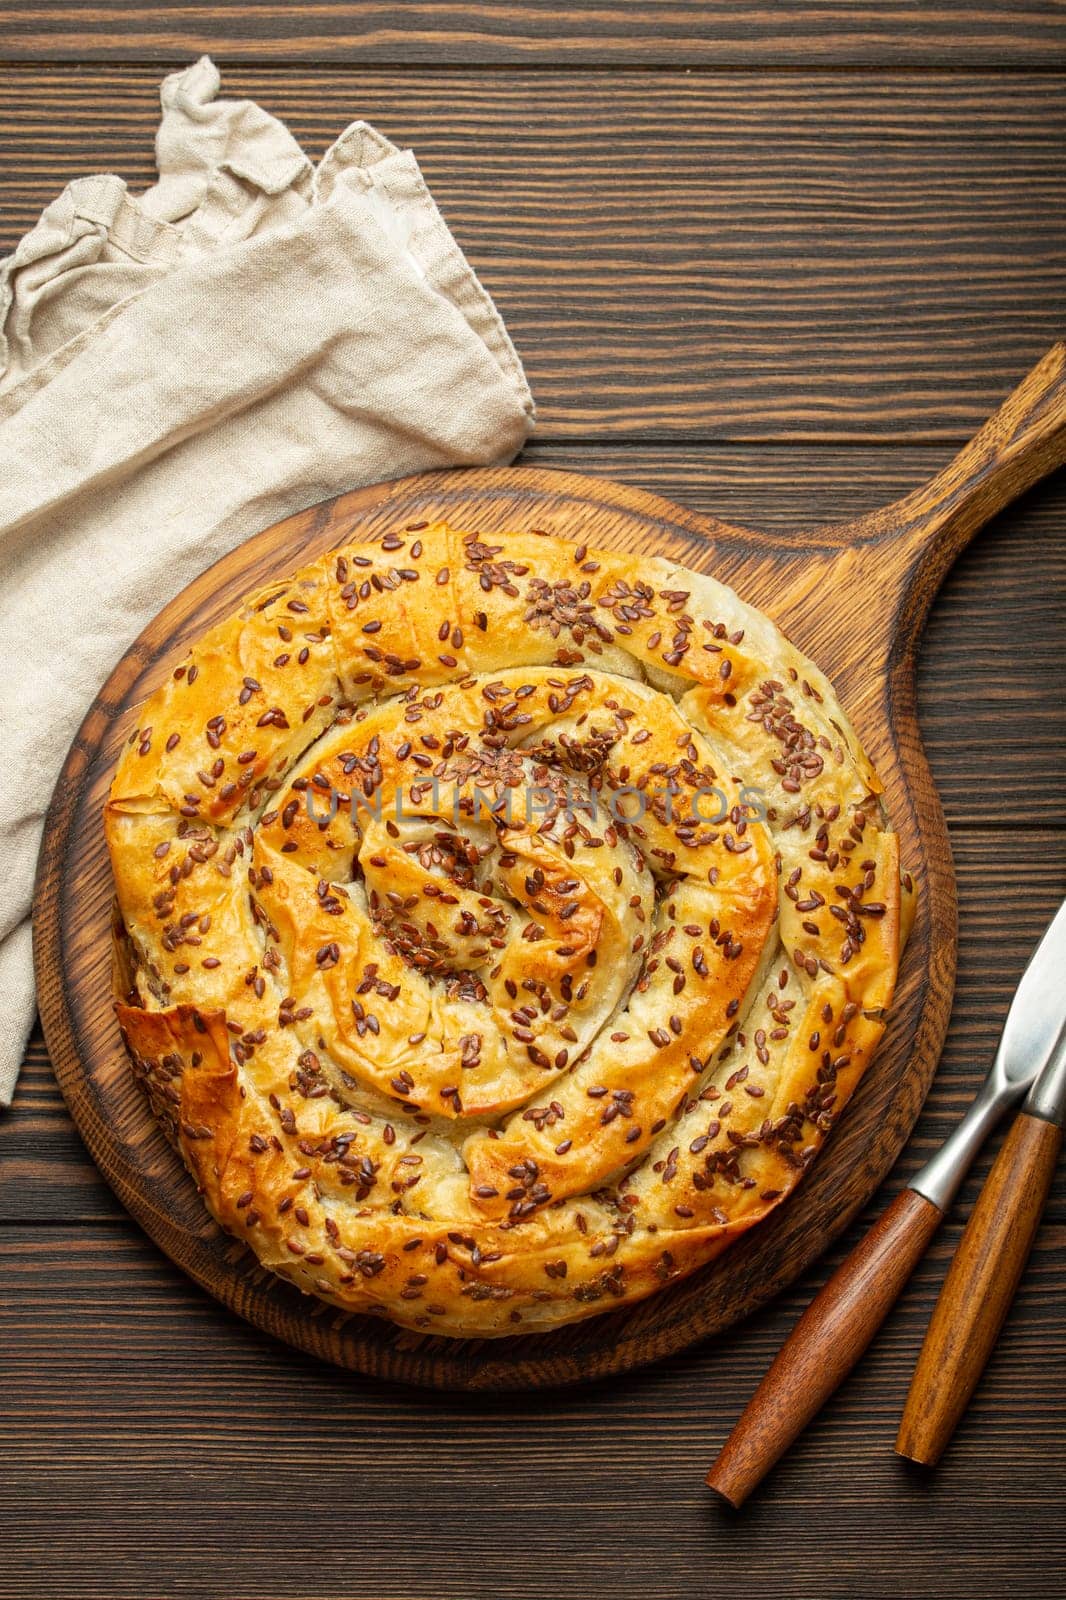 Burek made of phyllo dough with filling on cutting board, dark brown wooden rustic background top view. Traditional savoury spiral pie of Balkans, Middle East and Central Asia.